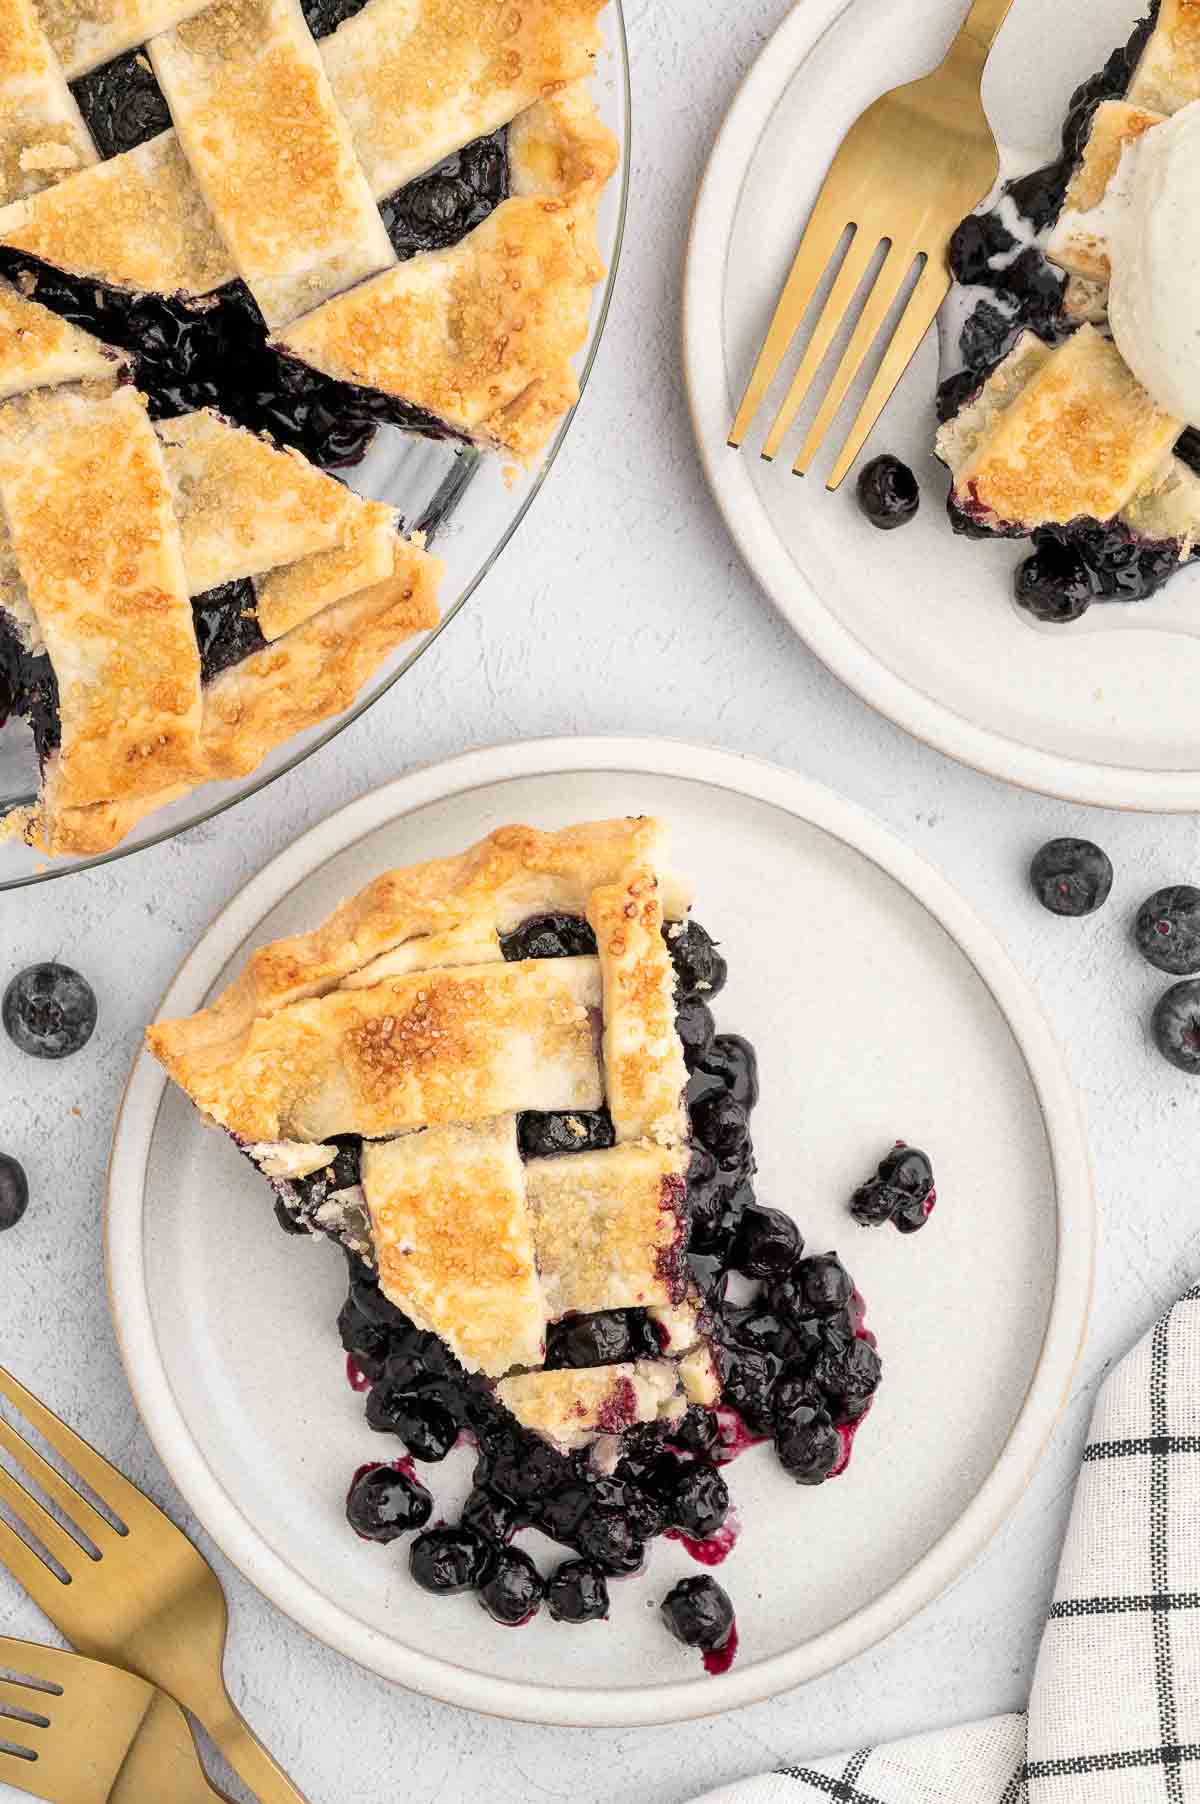 A slice of vegan blueberry pie with a lattice pattern golden crust on top, sitting on a plate.